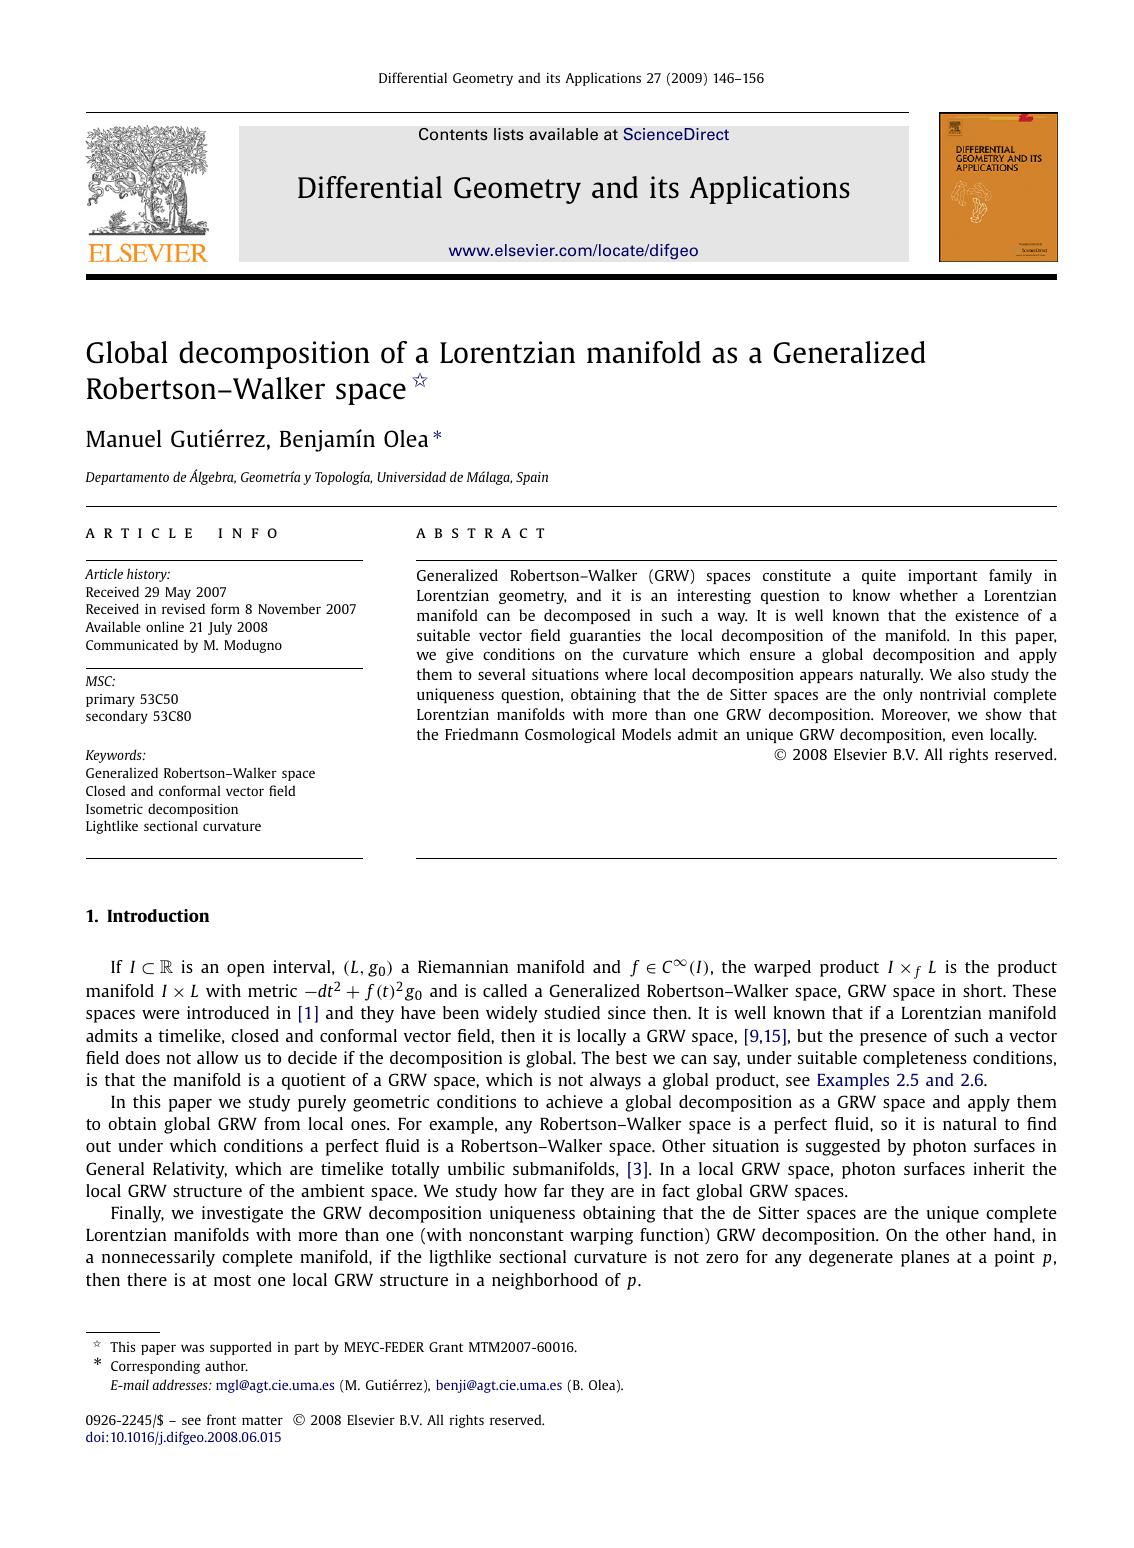 Global decomposition of a Lorentzian manifold as a Generalized RobertsonâWalker space by Manuel Gutiérrez; Benjamín Olea